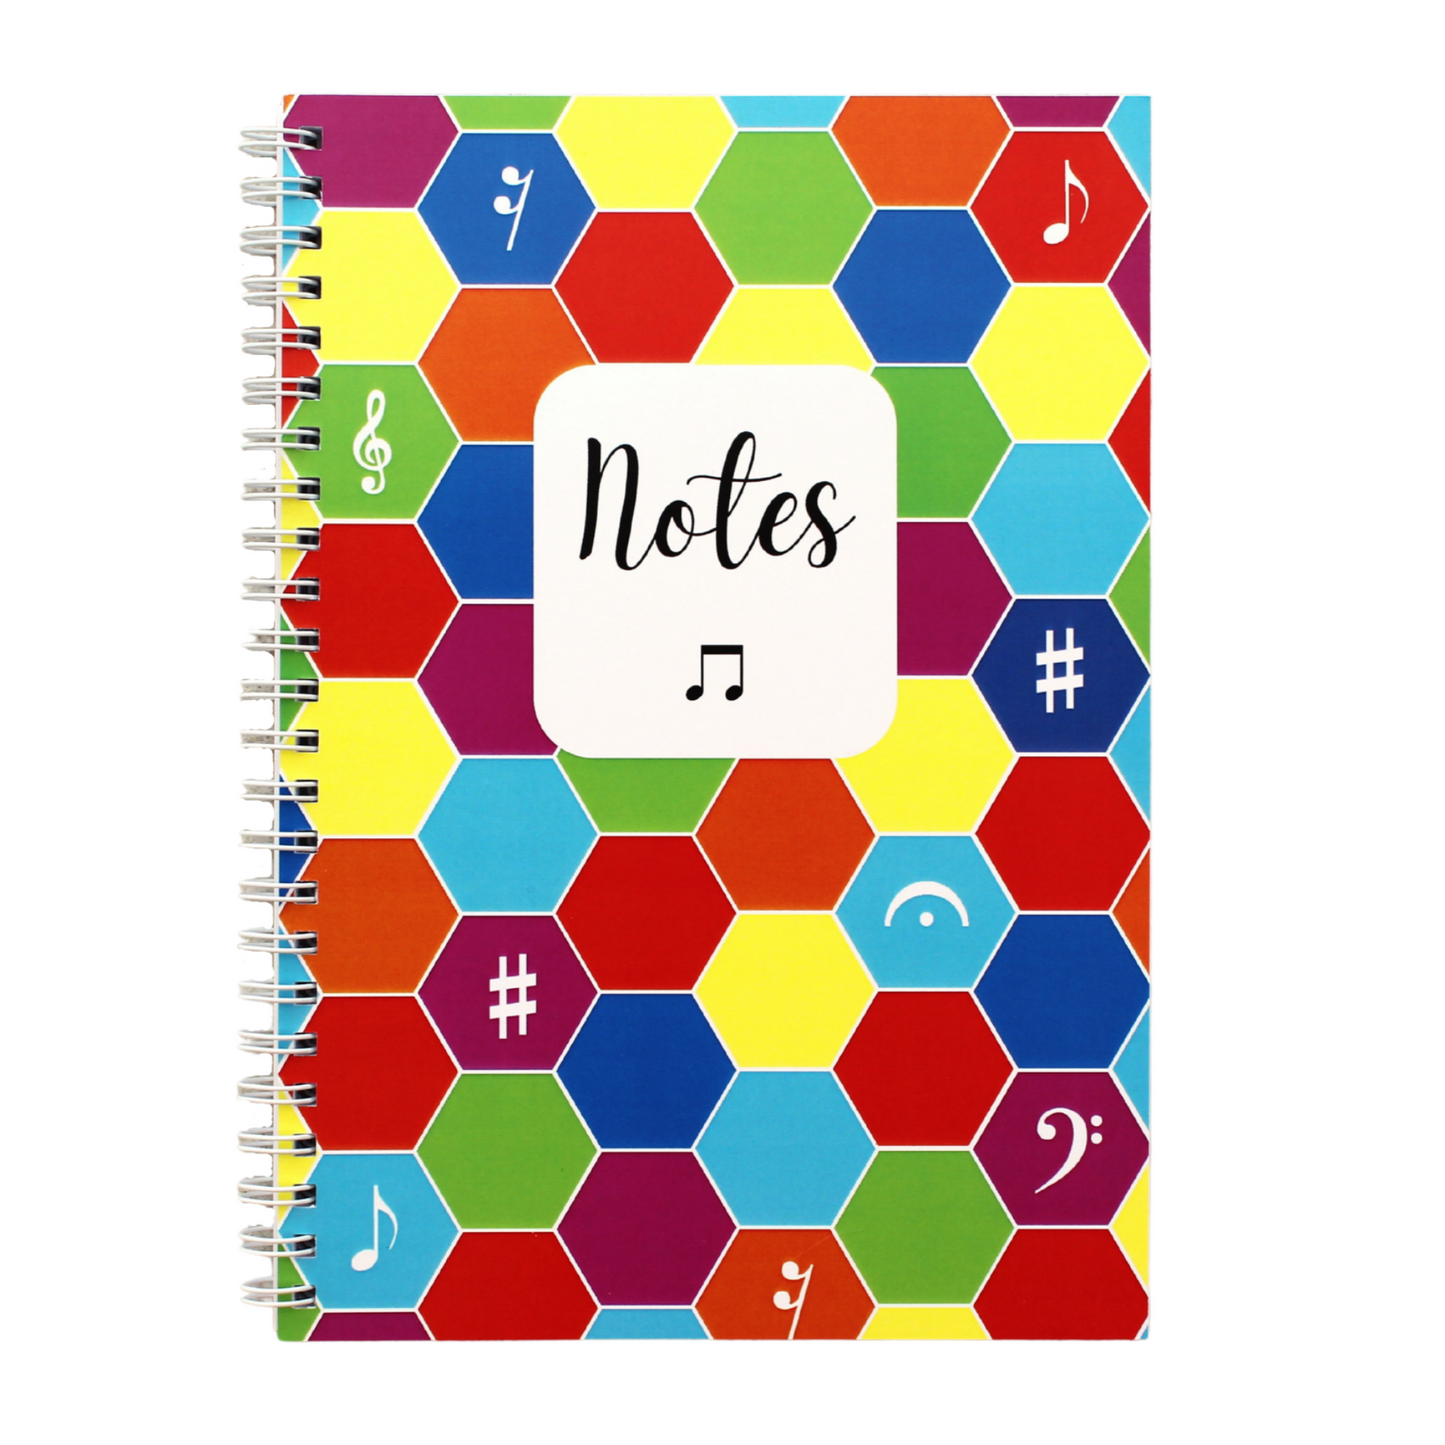 Ring bound music notebook with a colourful cover. Cover features a multicoloured hexagonal design with musical symbols.